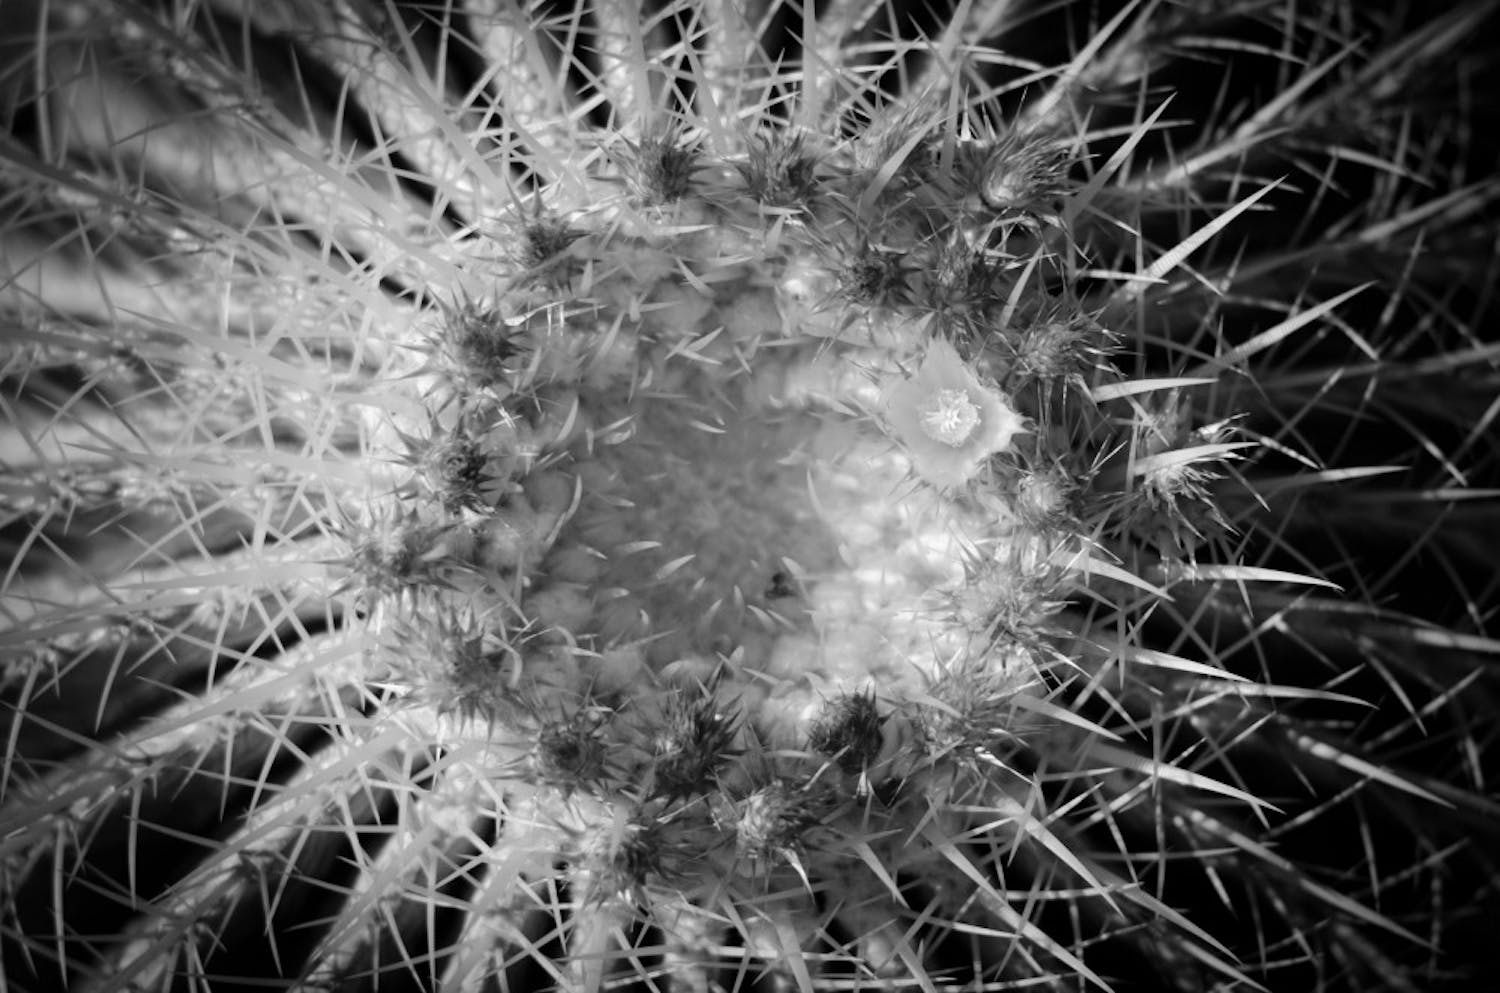 CACTUS ON CAMPUS: Light plays off of the top of a barrel cactus adjacent to the School of Human Evolution and Social Change on Sunday evening. (Photo by Aaron Lavinsky)